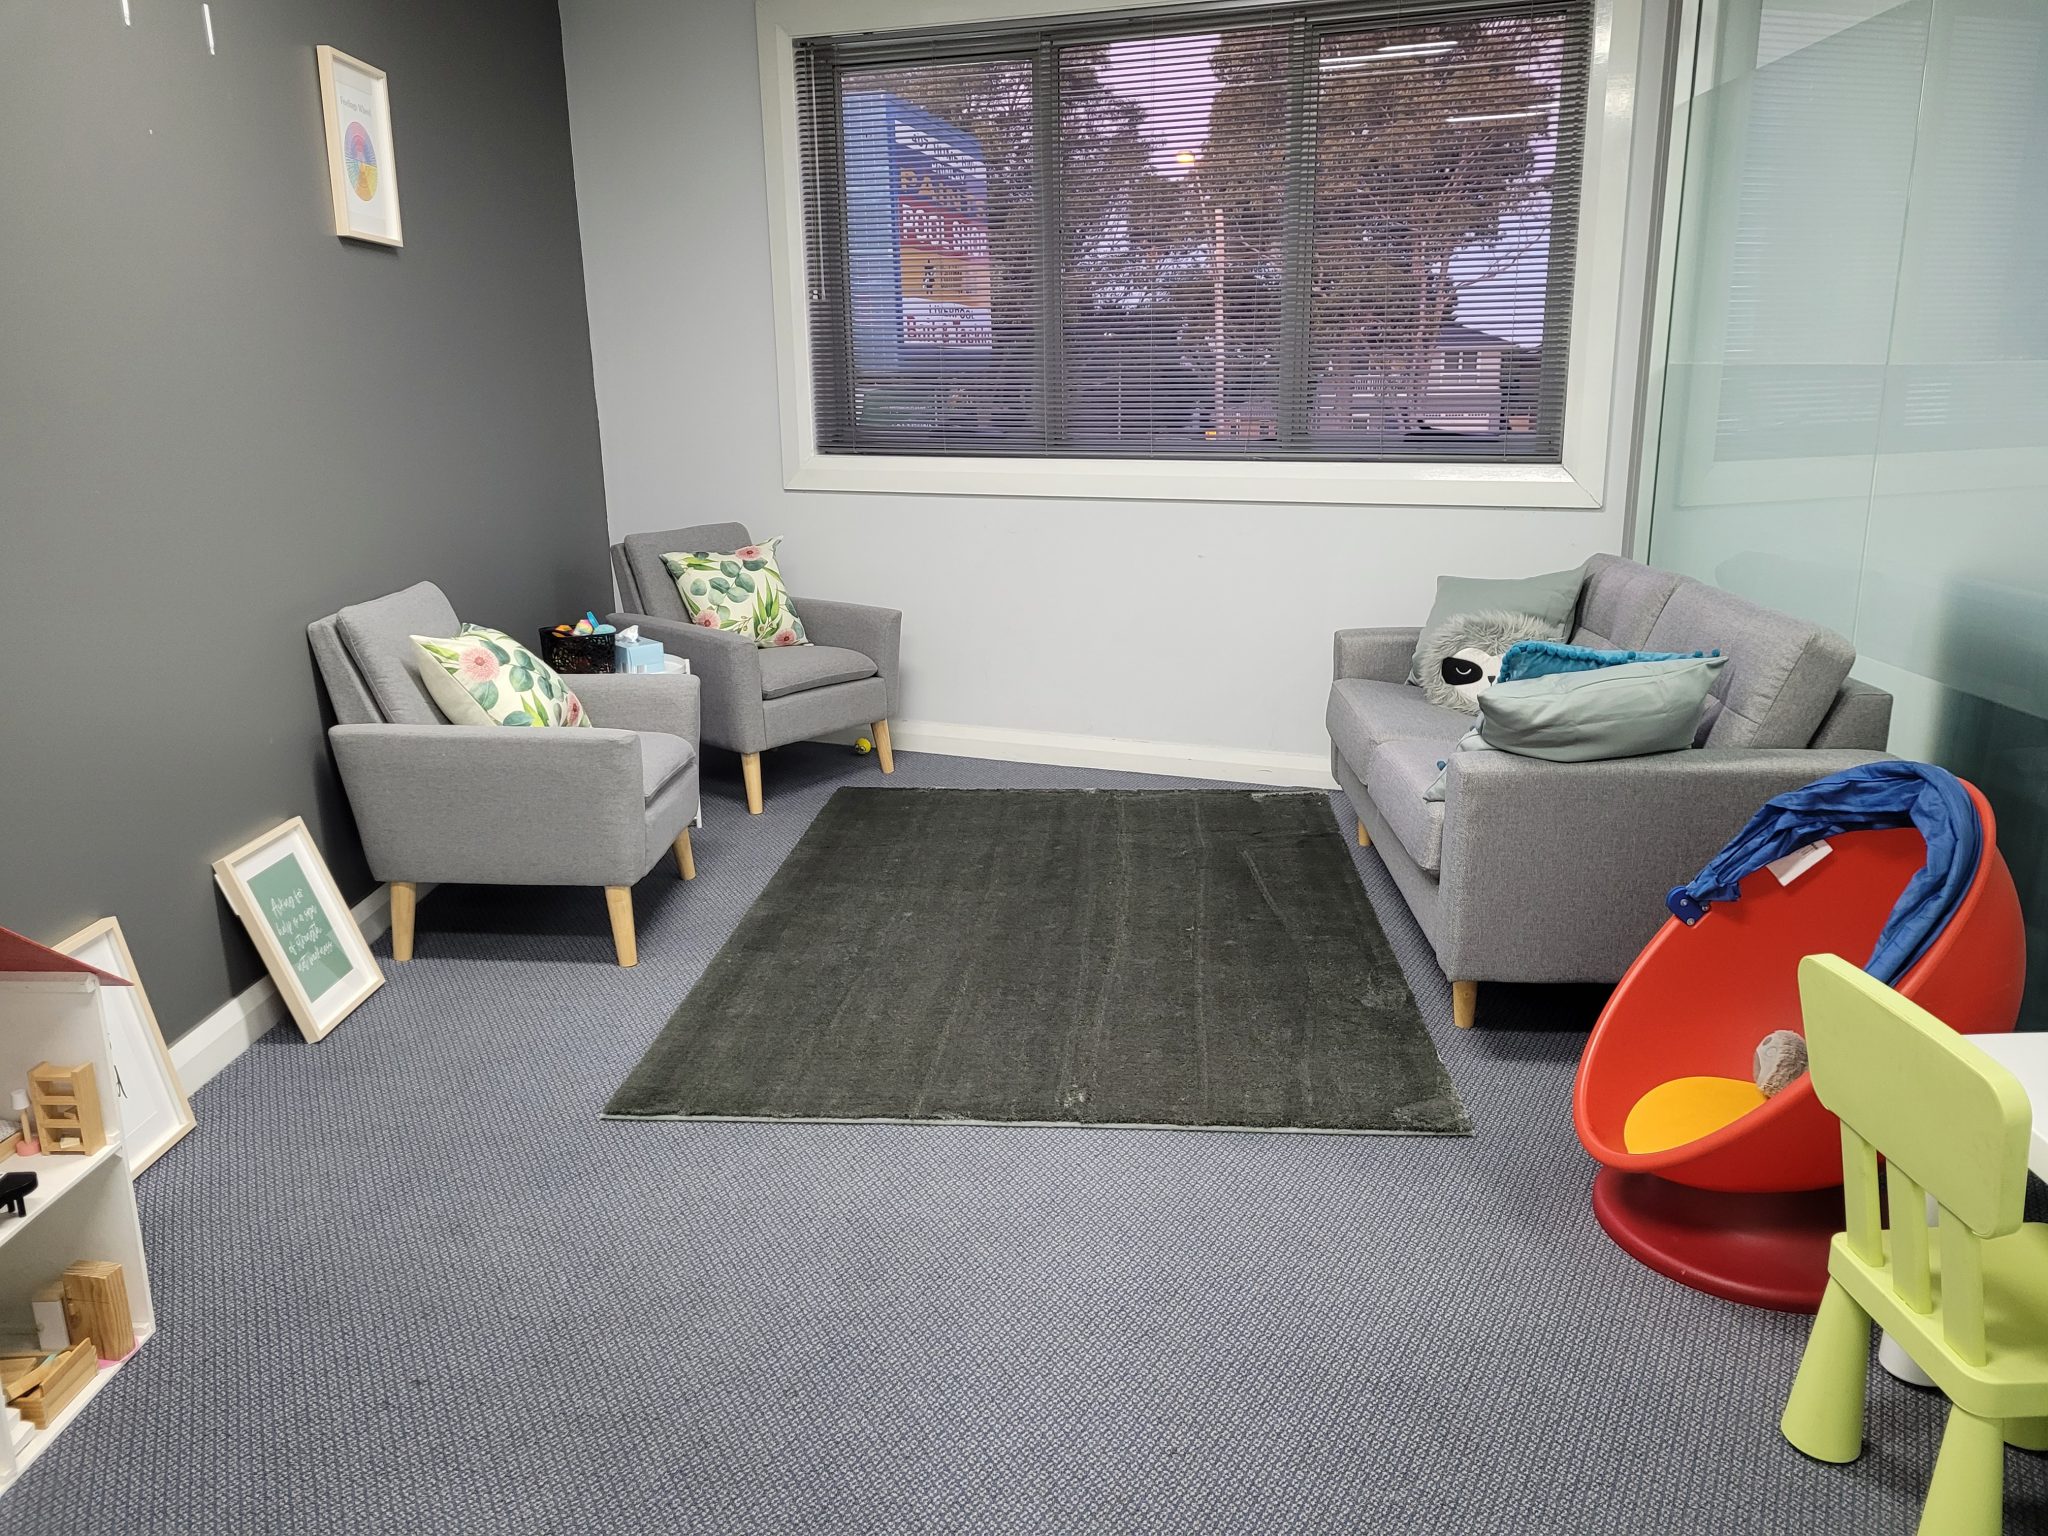 Counselling Rooms For Hire Treatment Room For Rent